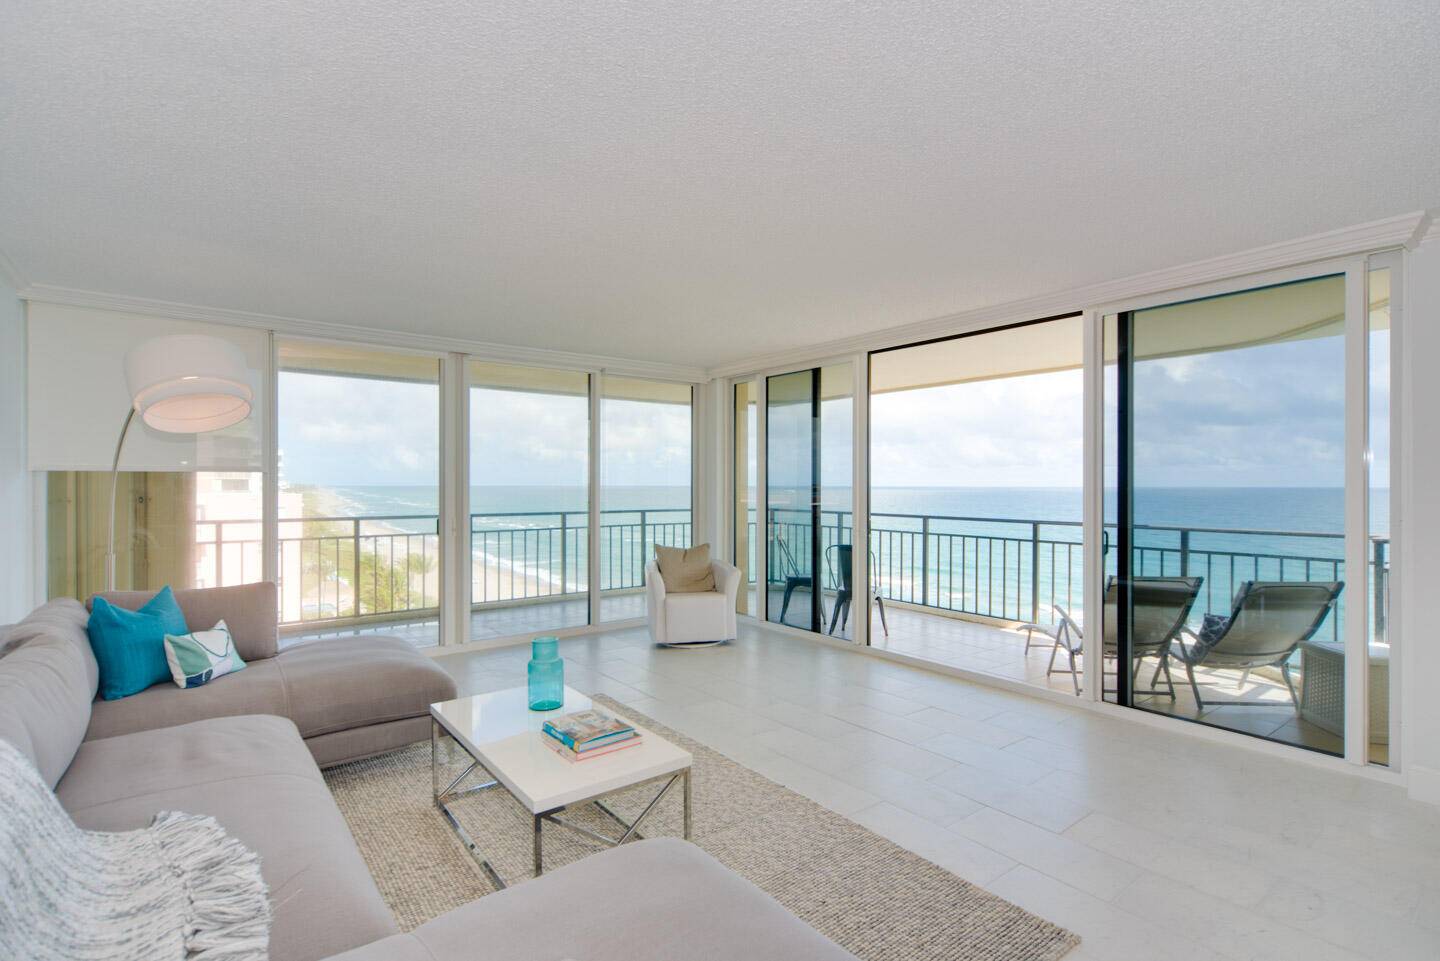 Renovated Lower Penthouse at Ocean Pines with jaw dropping direct ocean views offered turnkey furnished for the 2025 season.